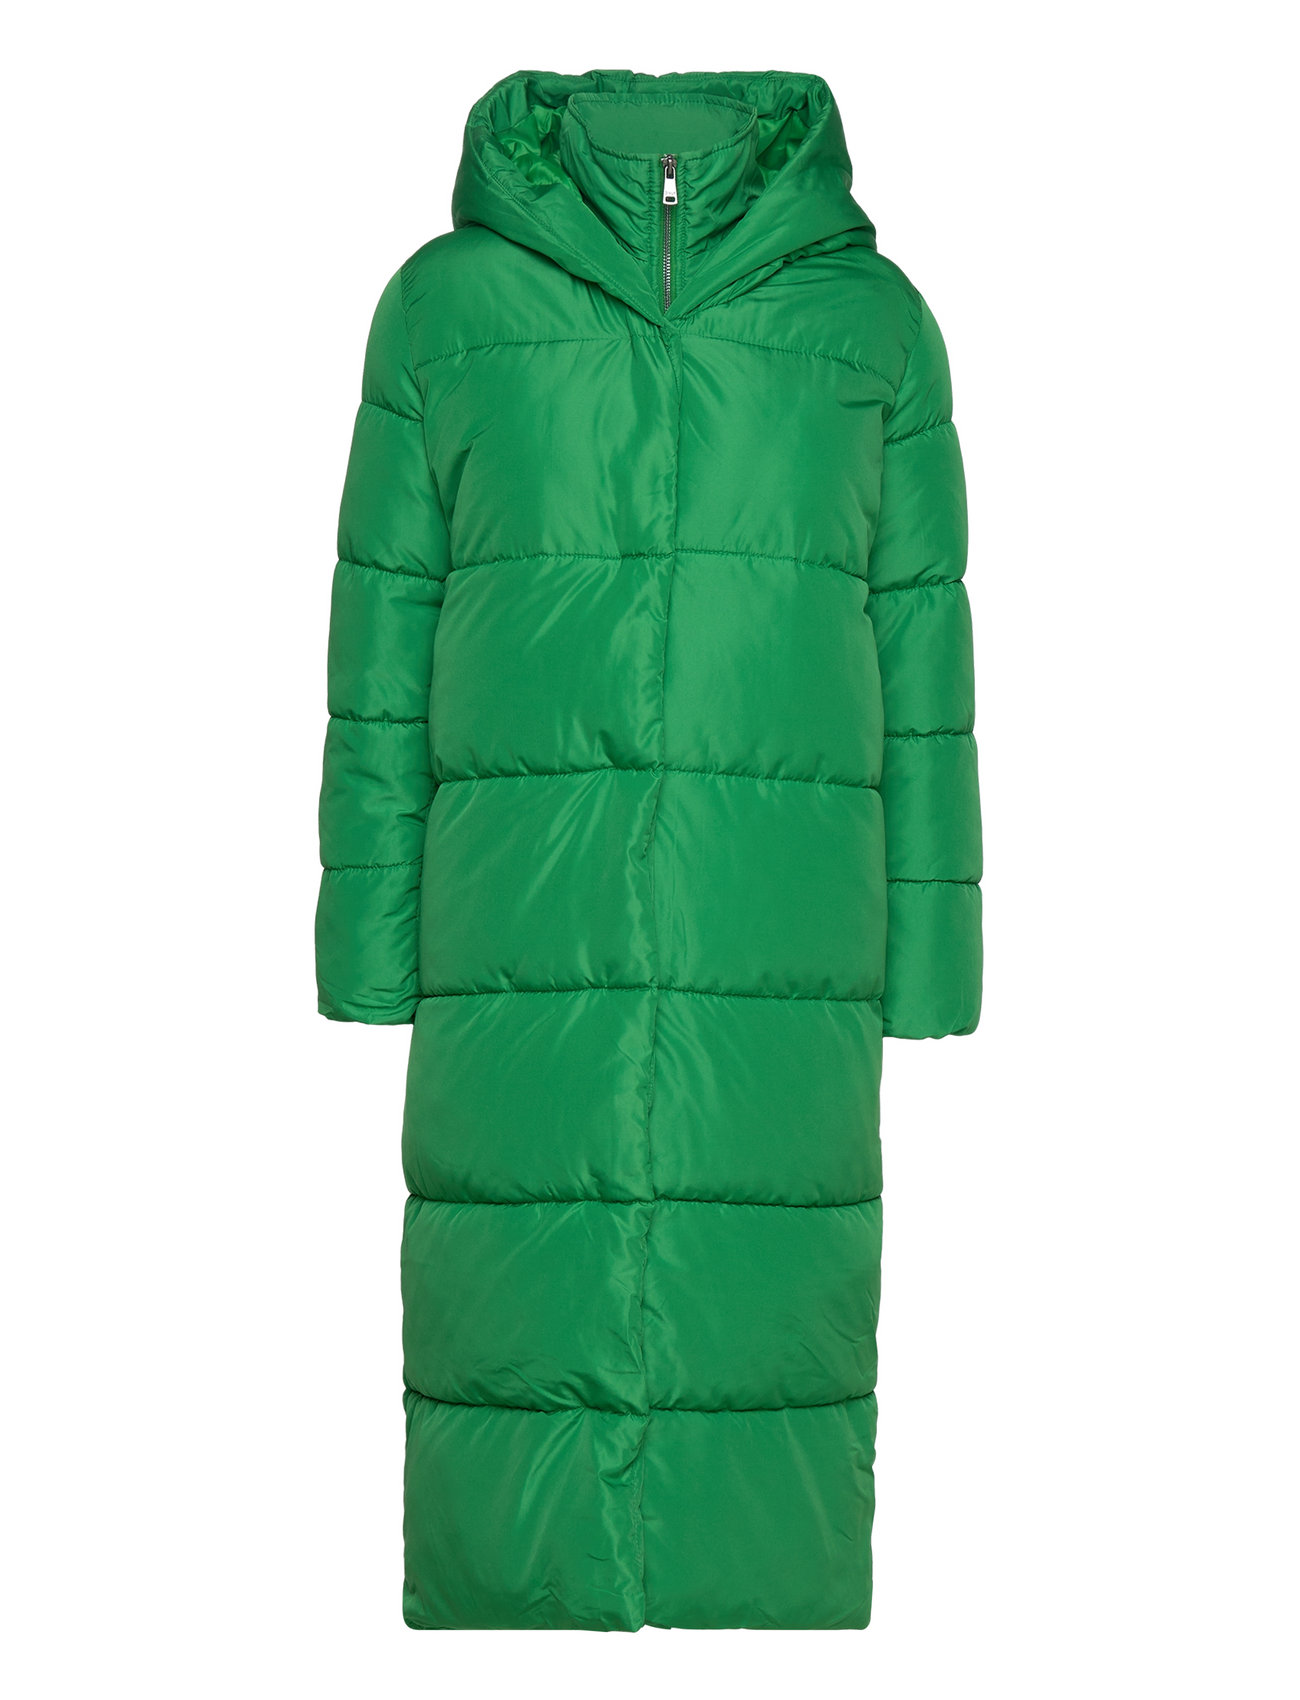 ONLY Onlamy X Long Puffer Padded Otw 89.99 Coats easy delivery Fast and - online ONLY Boozt.com. at Coat Buy €. returns from